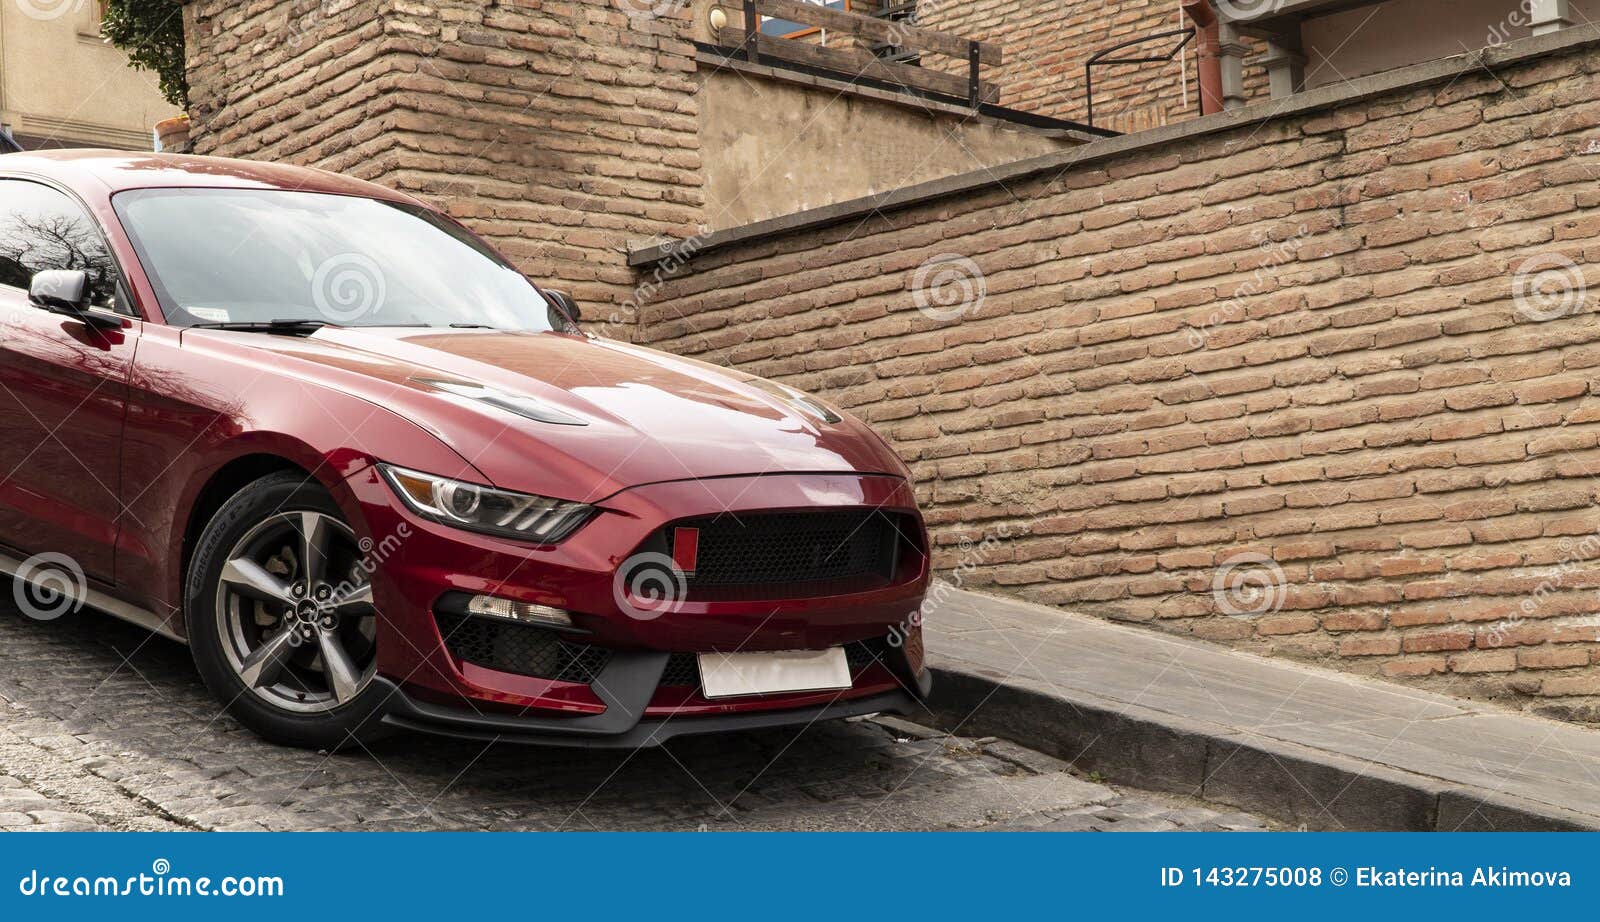 Cool red car stock photo. Image of travel, powerful - 143275008